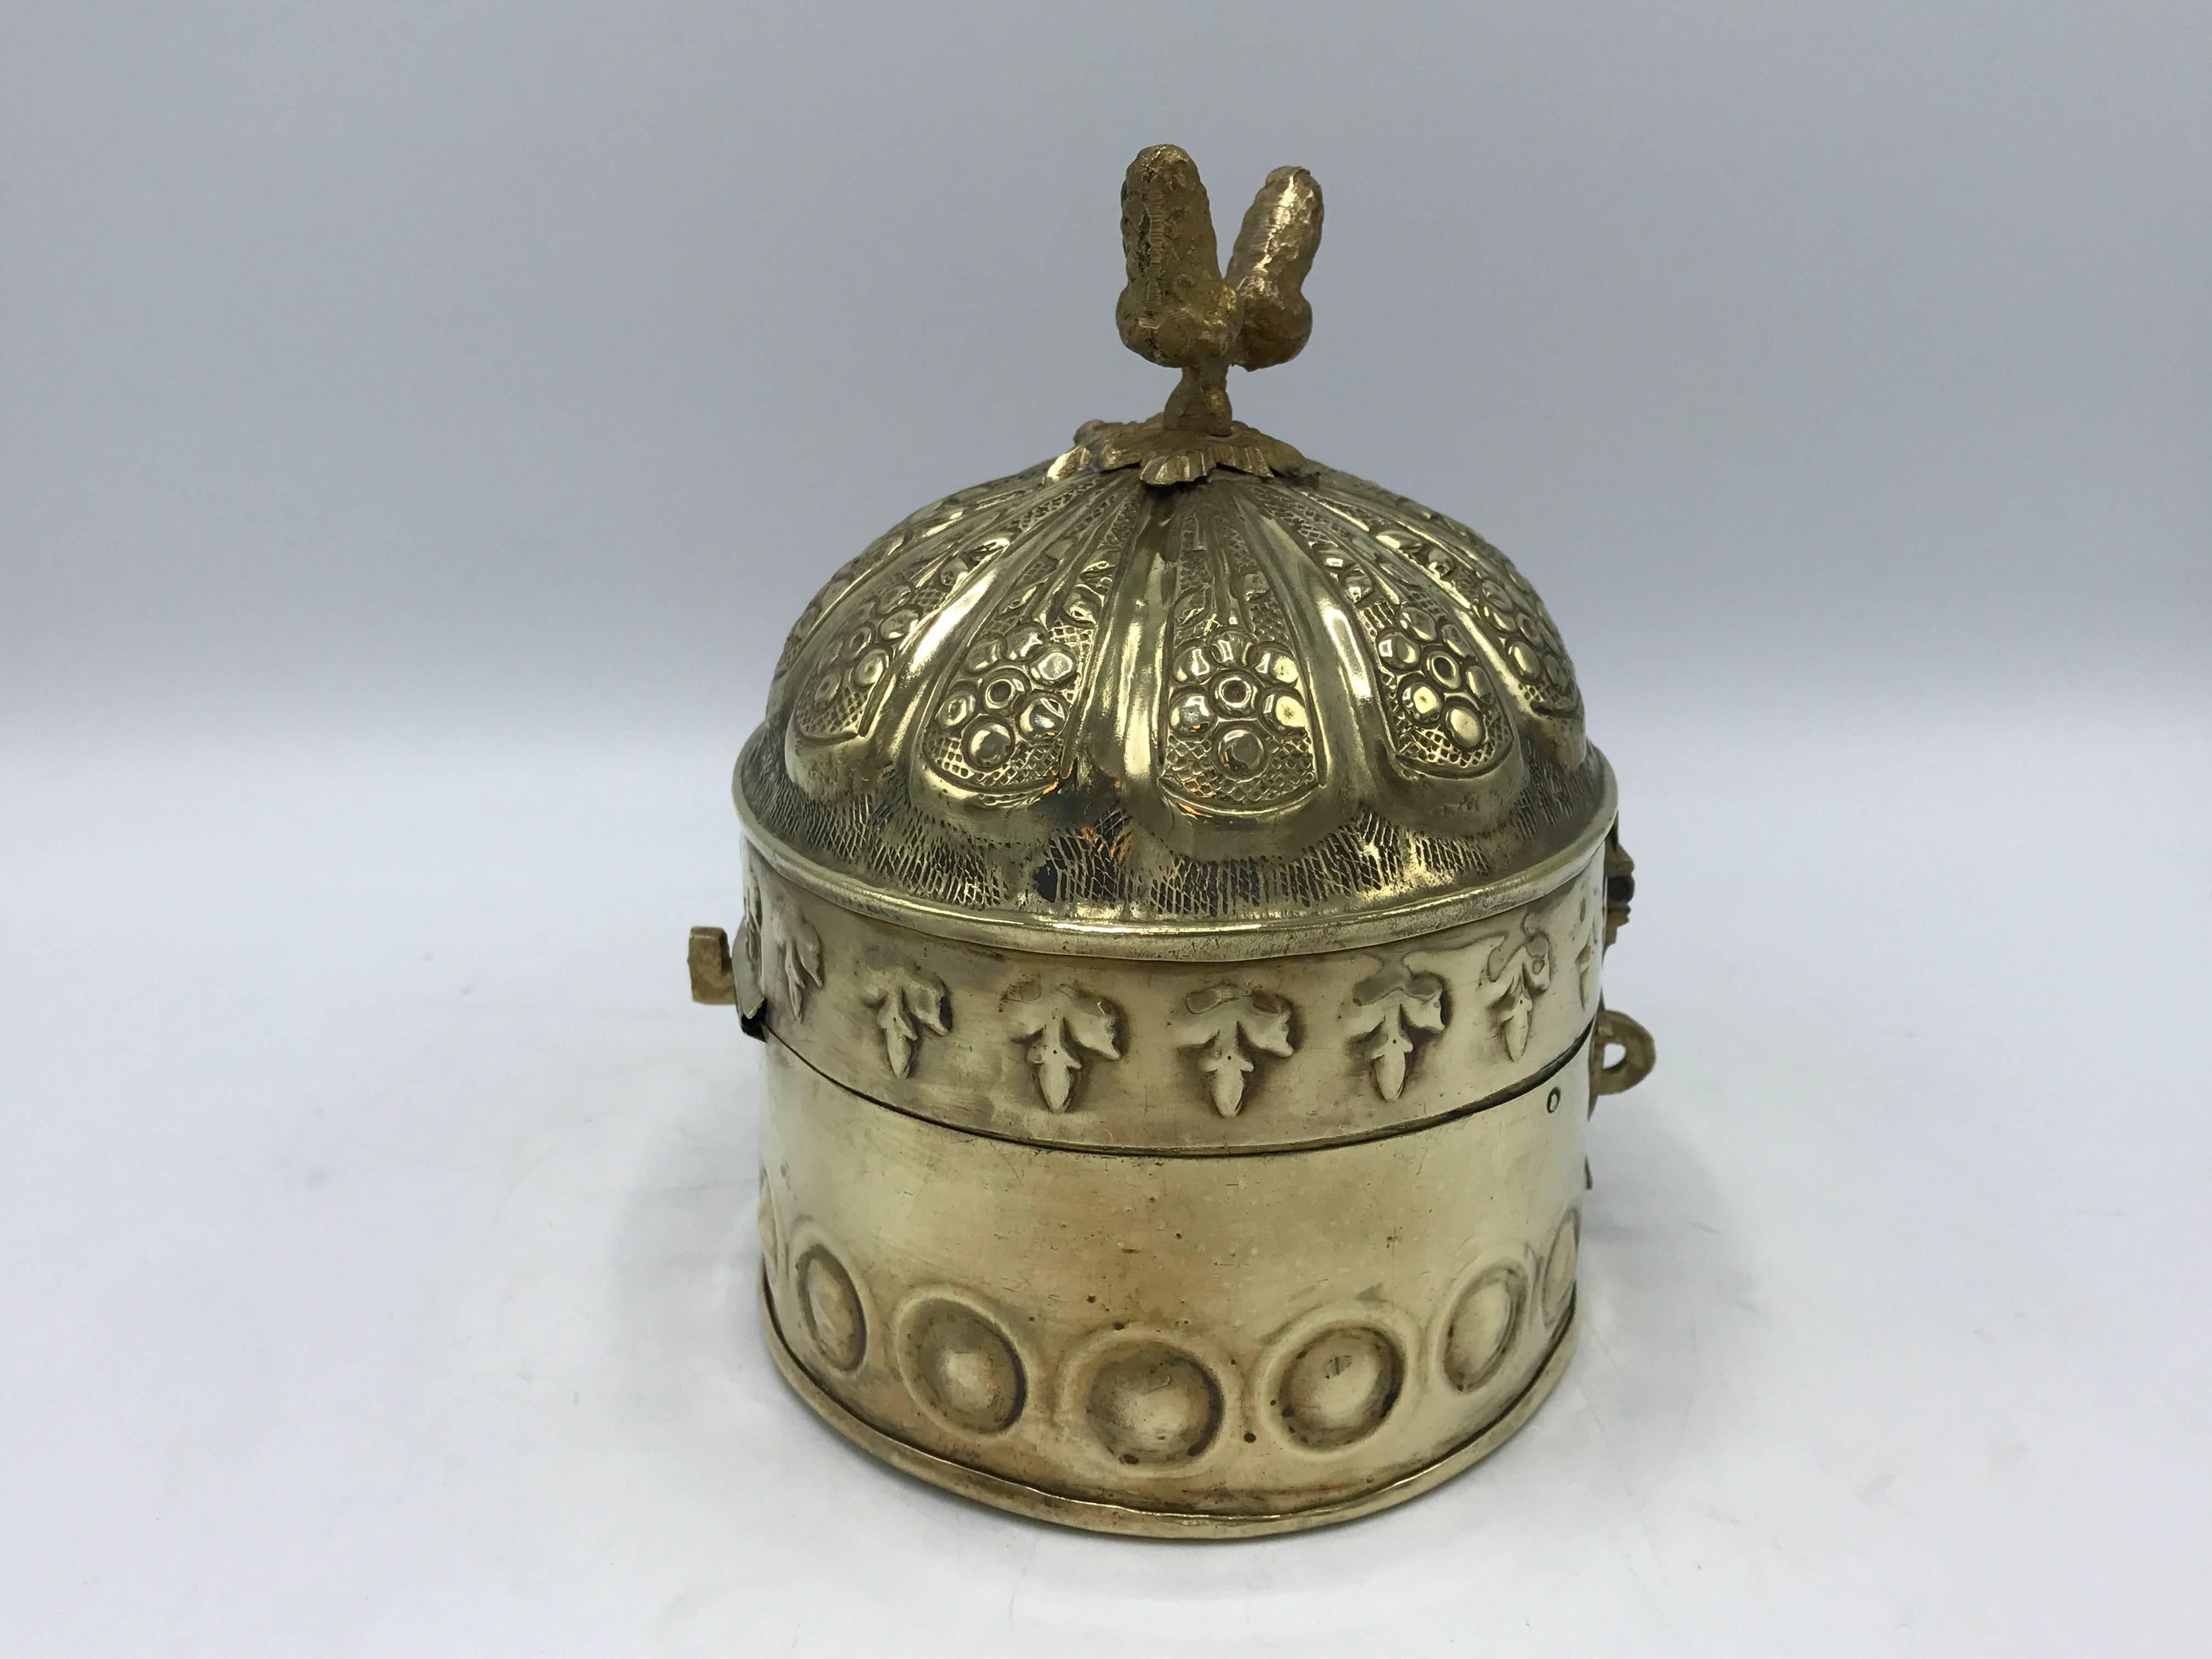 Polished 1960s, Brass Canister with Ornate Detailing